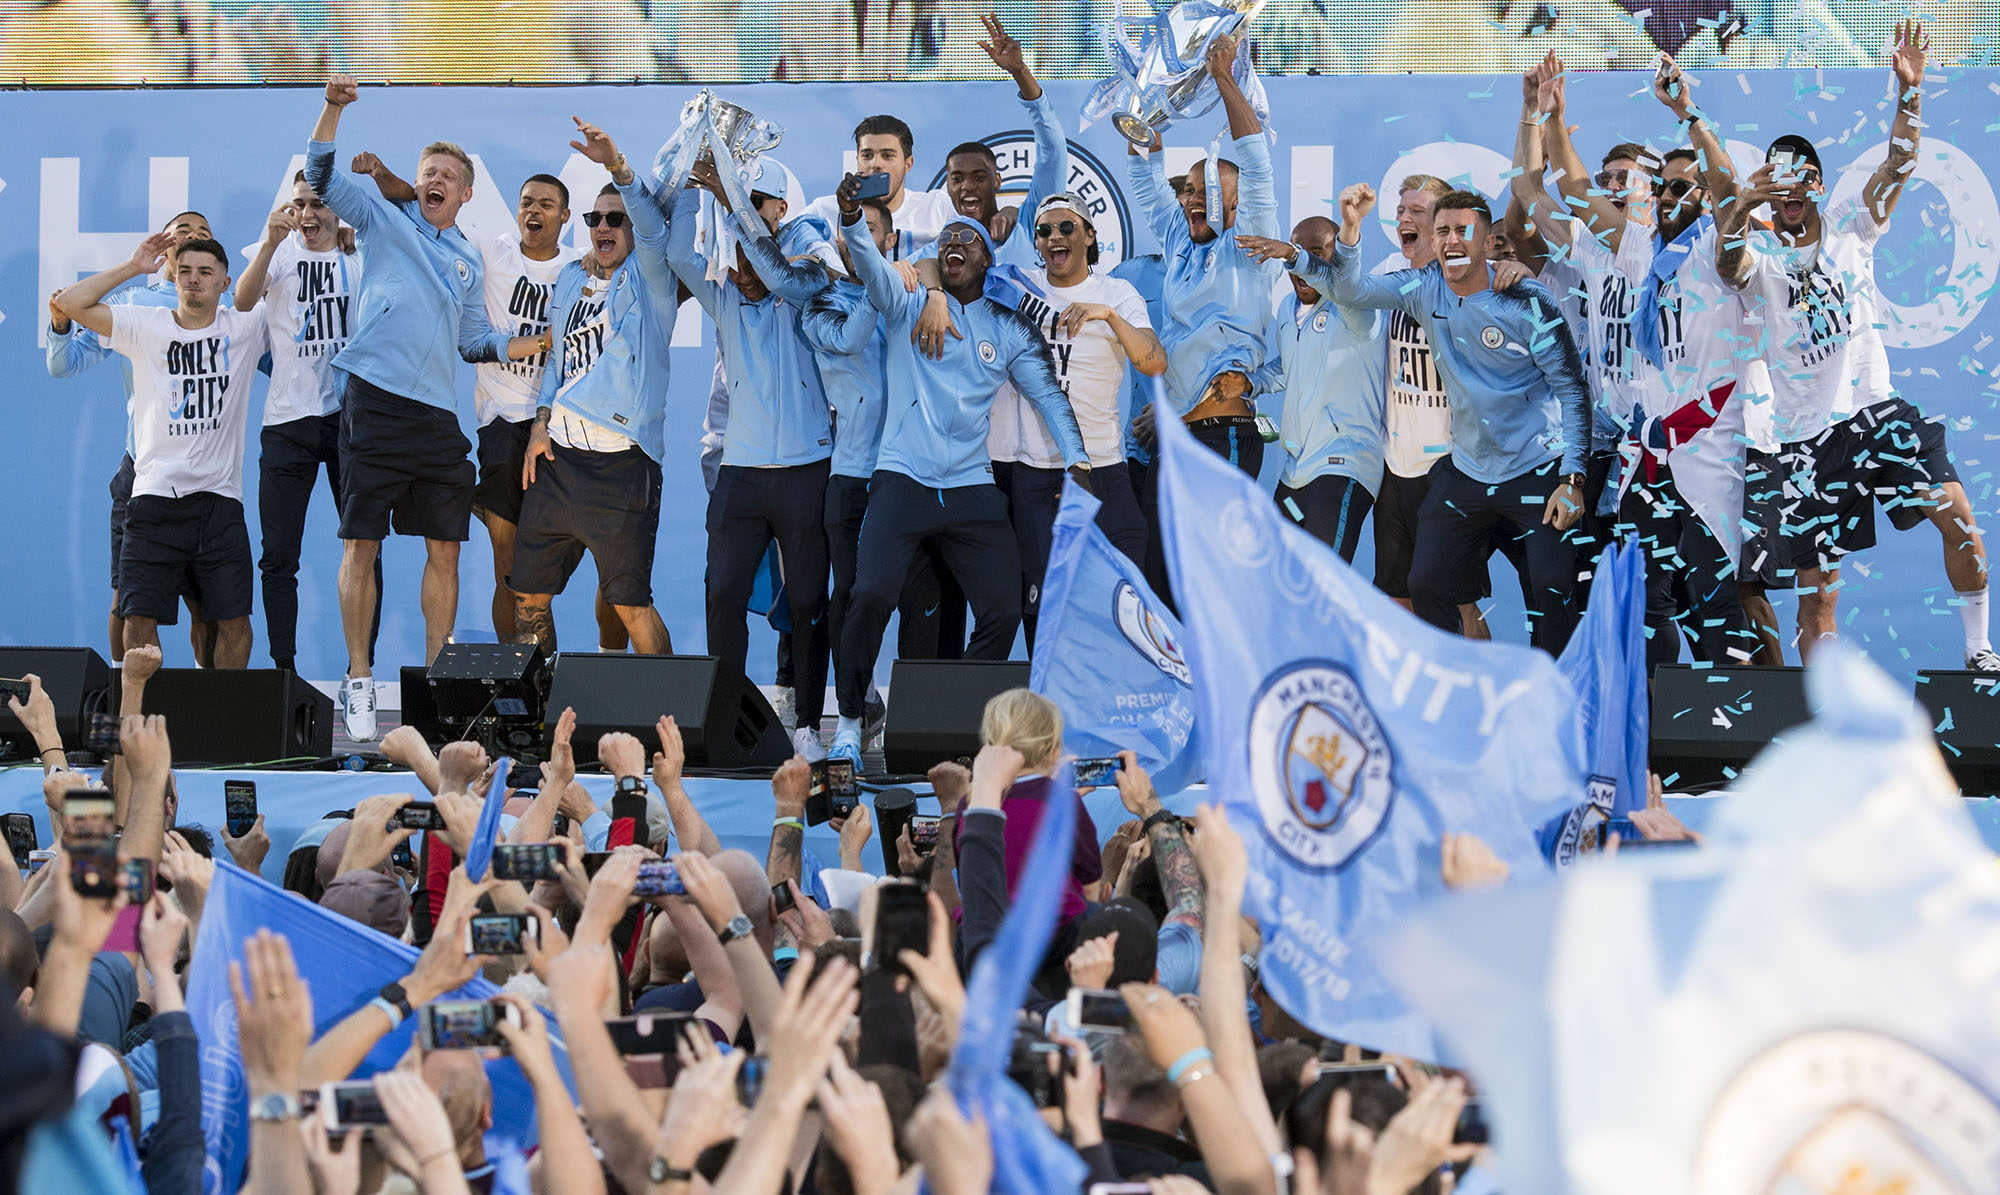 Manchester City Trophy Parade Jon Parker Lee Photographer Image ©Licensed to Manchester Evening News / Jon Parker Lee Manchester City celebrate their historic FA Premier League title win with a trophy parade through the streets of Manchester on Monday 14 May 2018. Picture by Jon Parker Lee